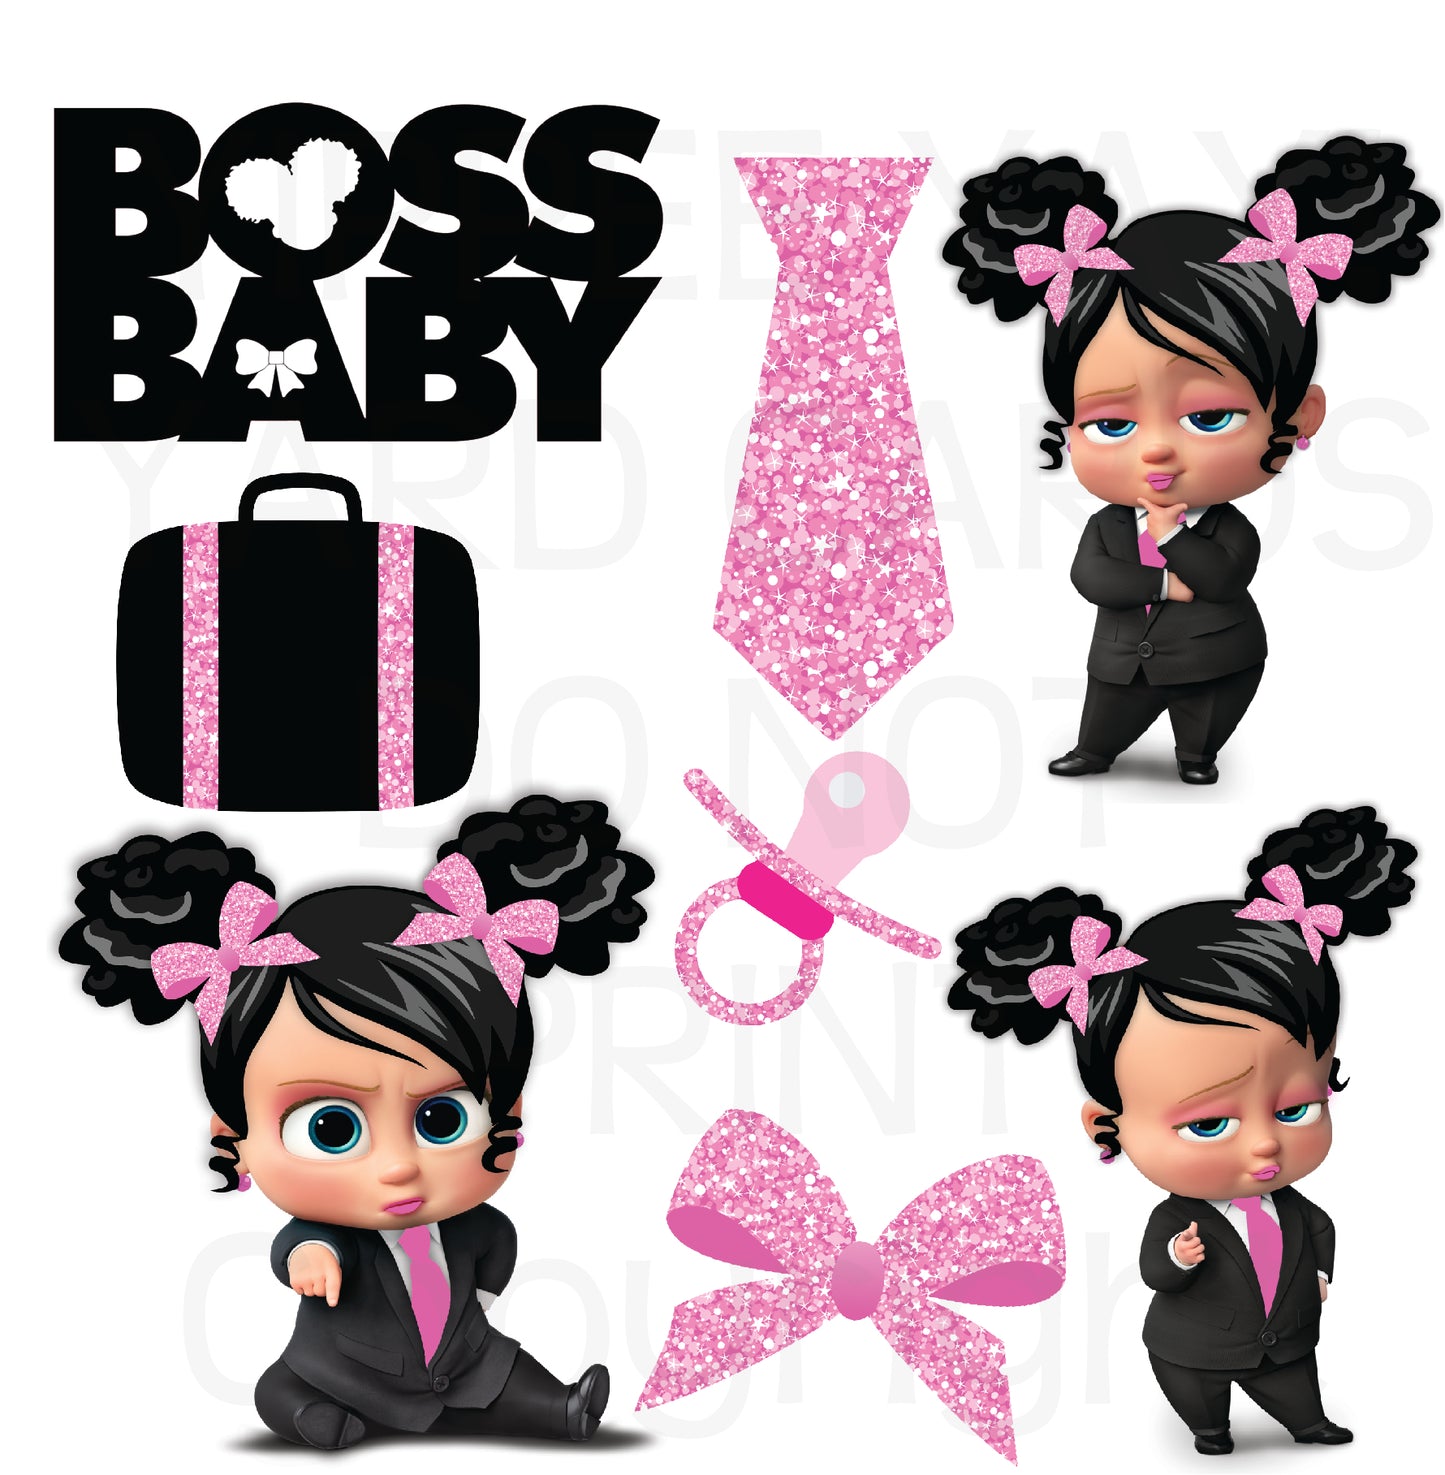 Boss Baby Girl Set 2 Half Sheet Misc. (Must Purchase 2 Half sheets - You Can Mix & Match)